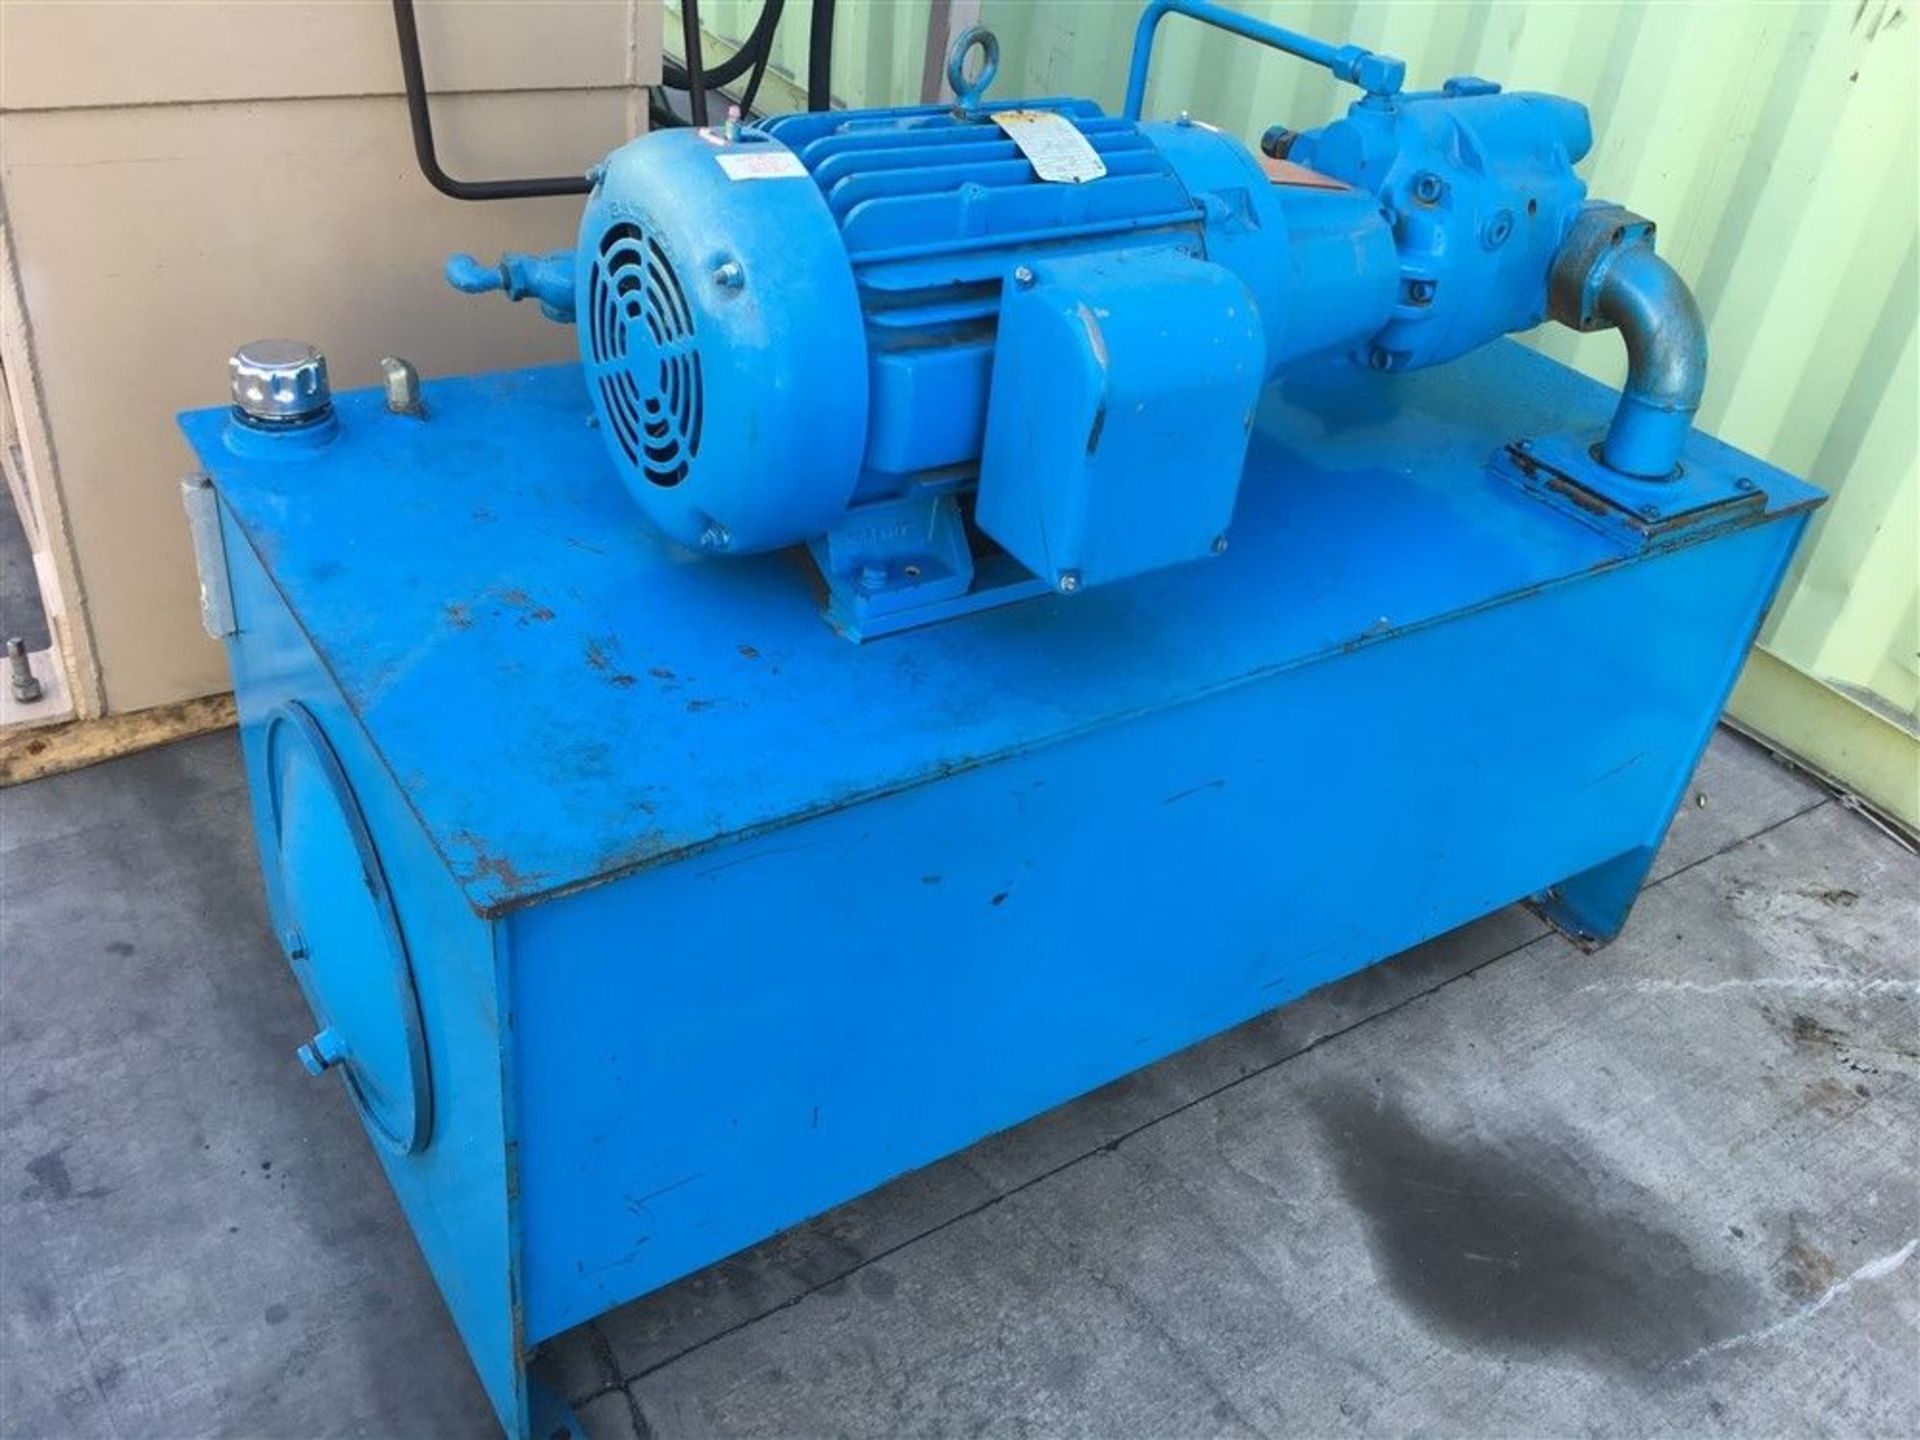 HYDRAULIC 4 CYLINDER ASSEMBLY PRESS W/ 140 GALLON 25 HP PUMP ASSEMBLY ARC DIMENSIONS: 46" X 26-3/ - Image 8 of 9